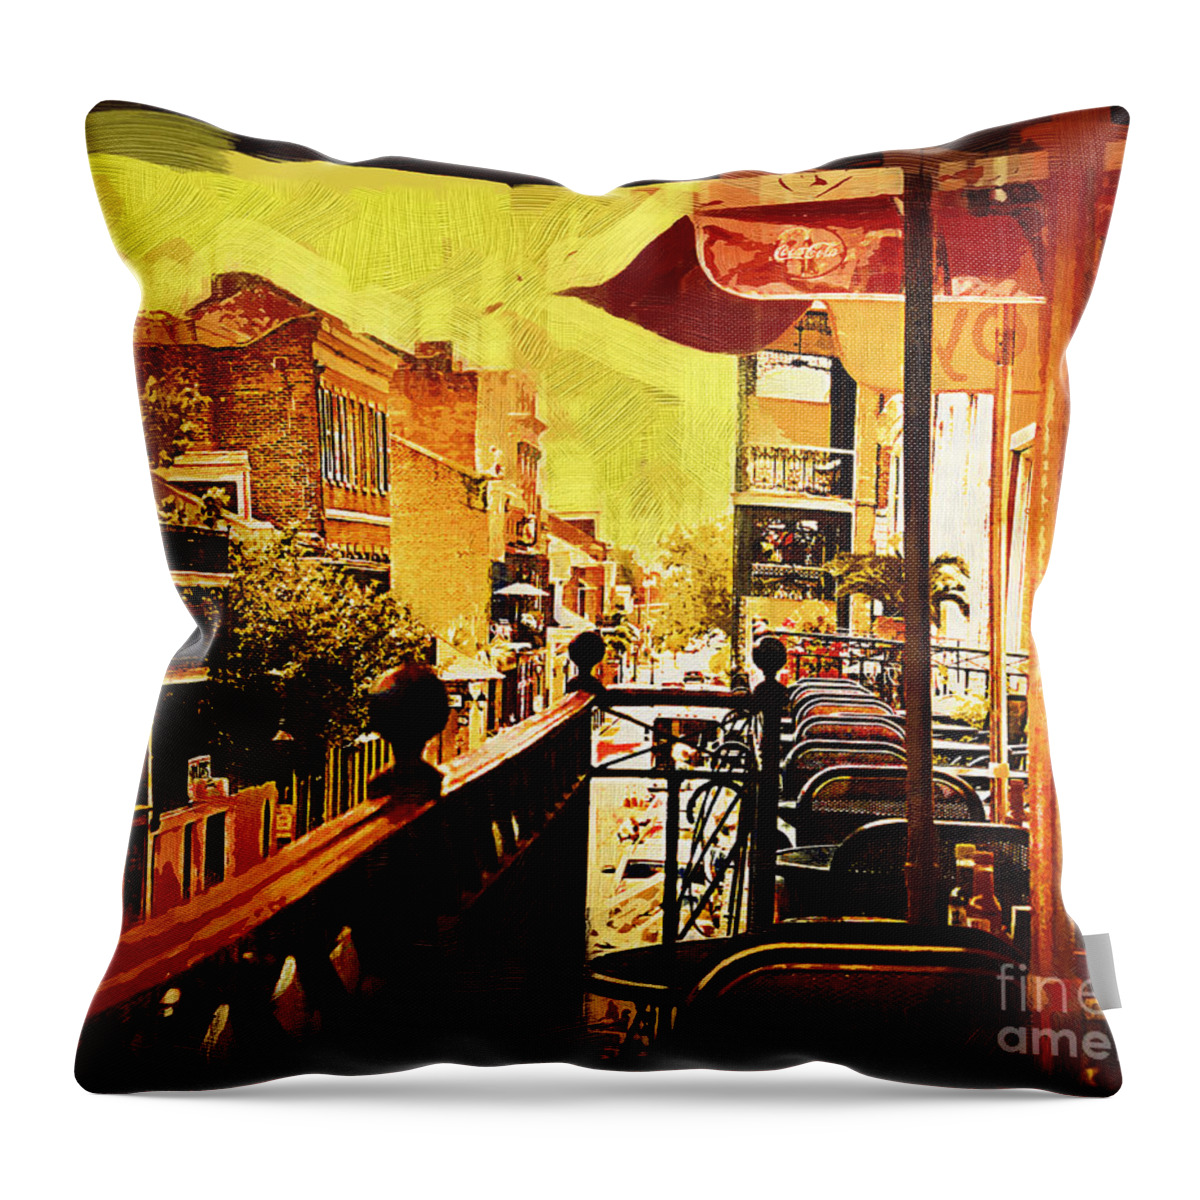 New-orleans Throw Pillow featuring the digital art Balcony Cafe by Kirt Tisdale